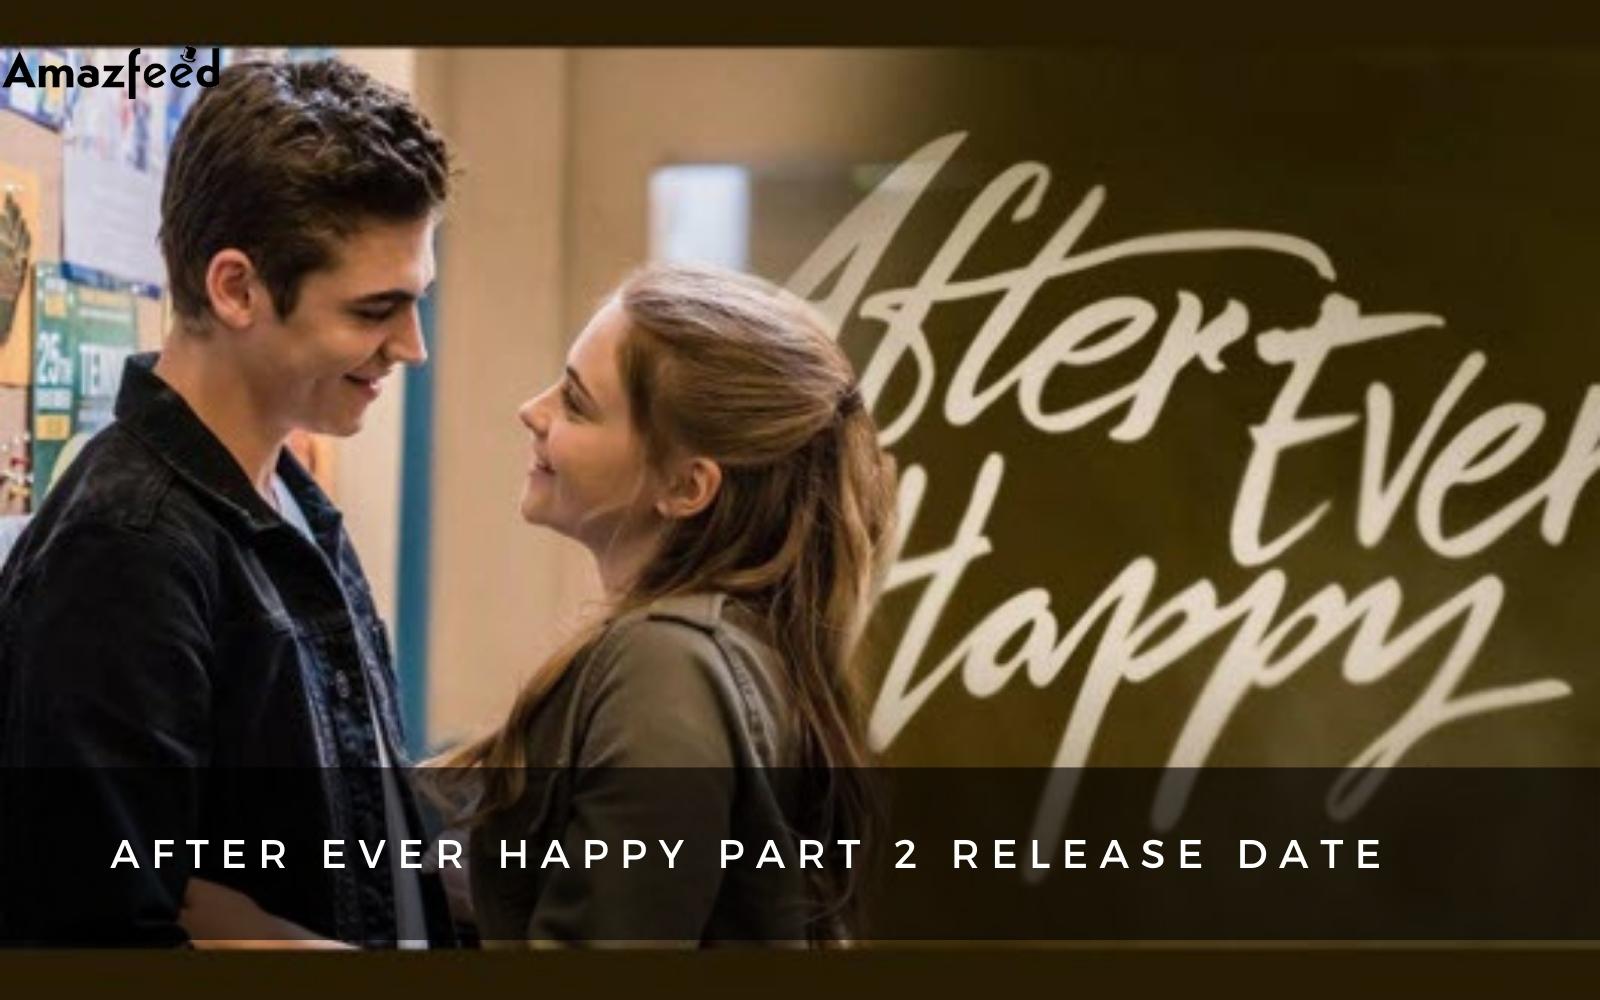 after ever happy part 2 release date